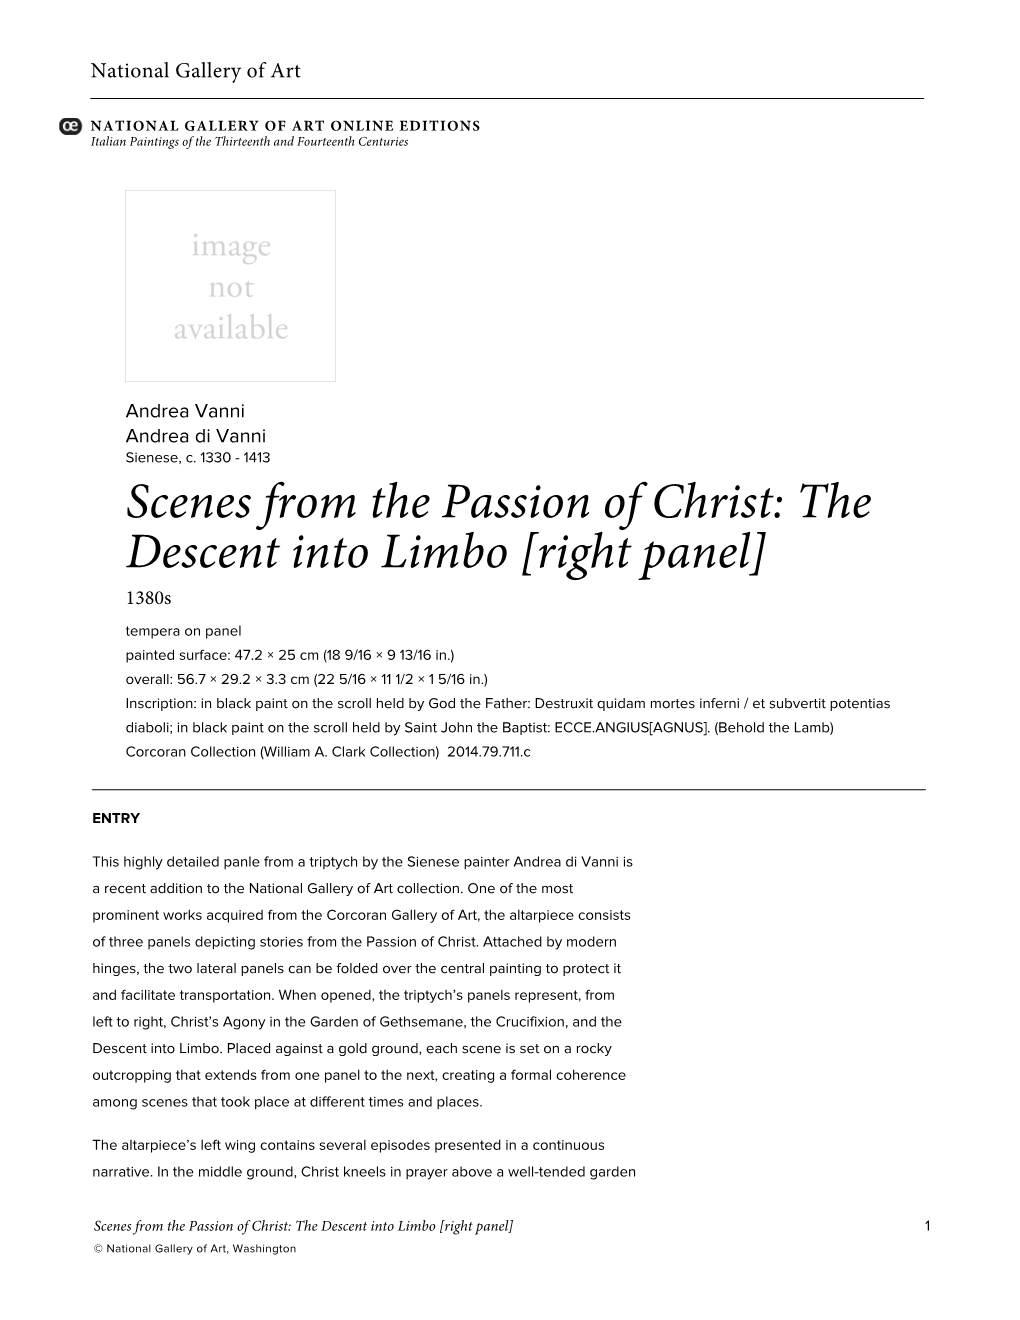 Scenes from the Passion of Christ: The